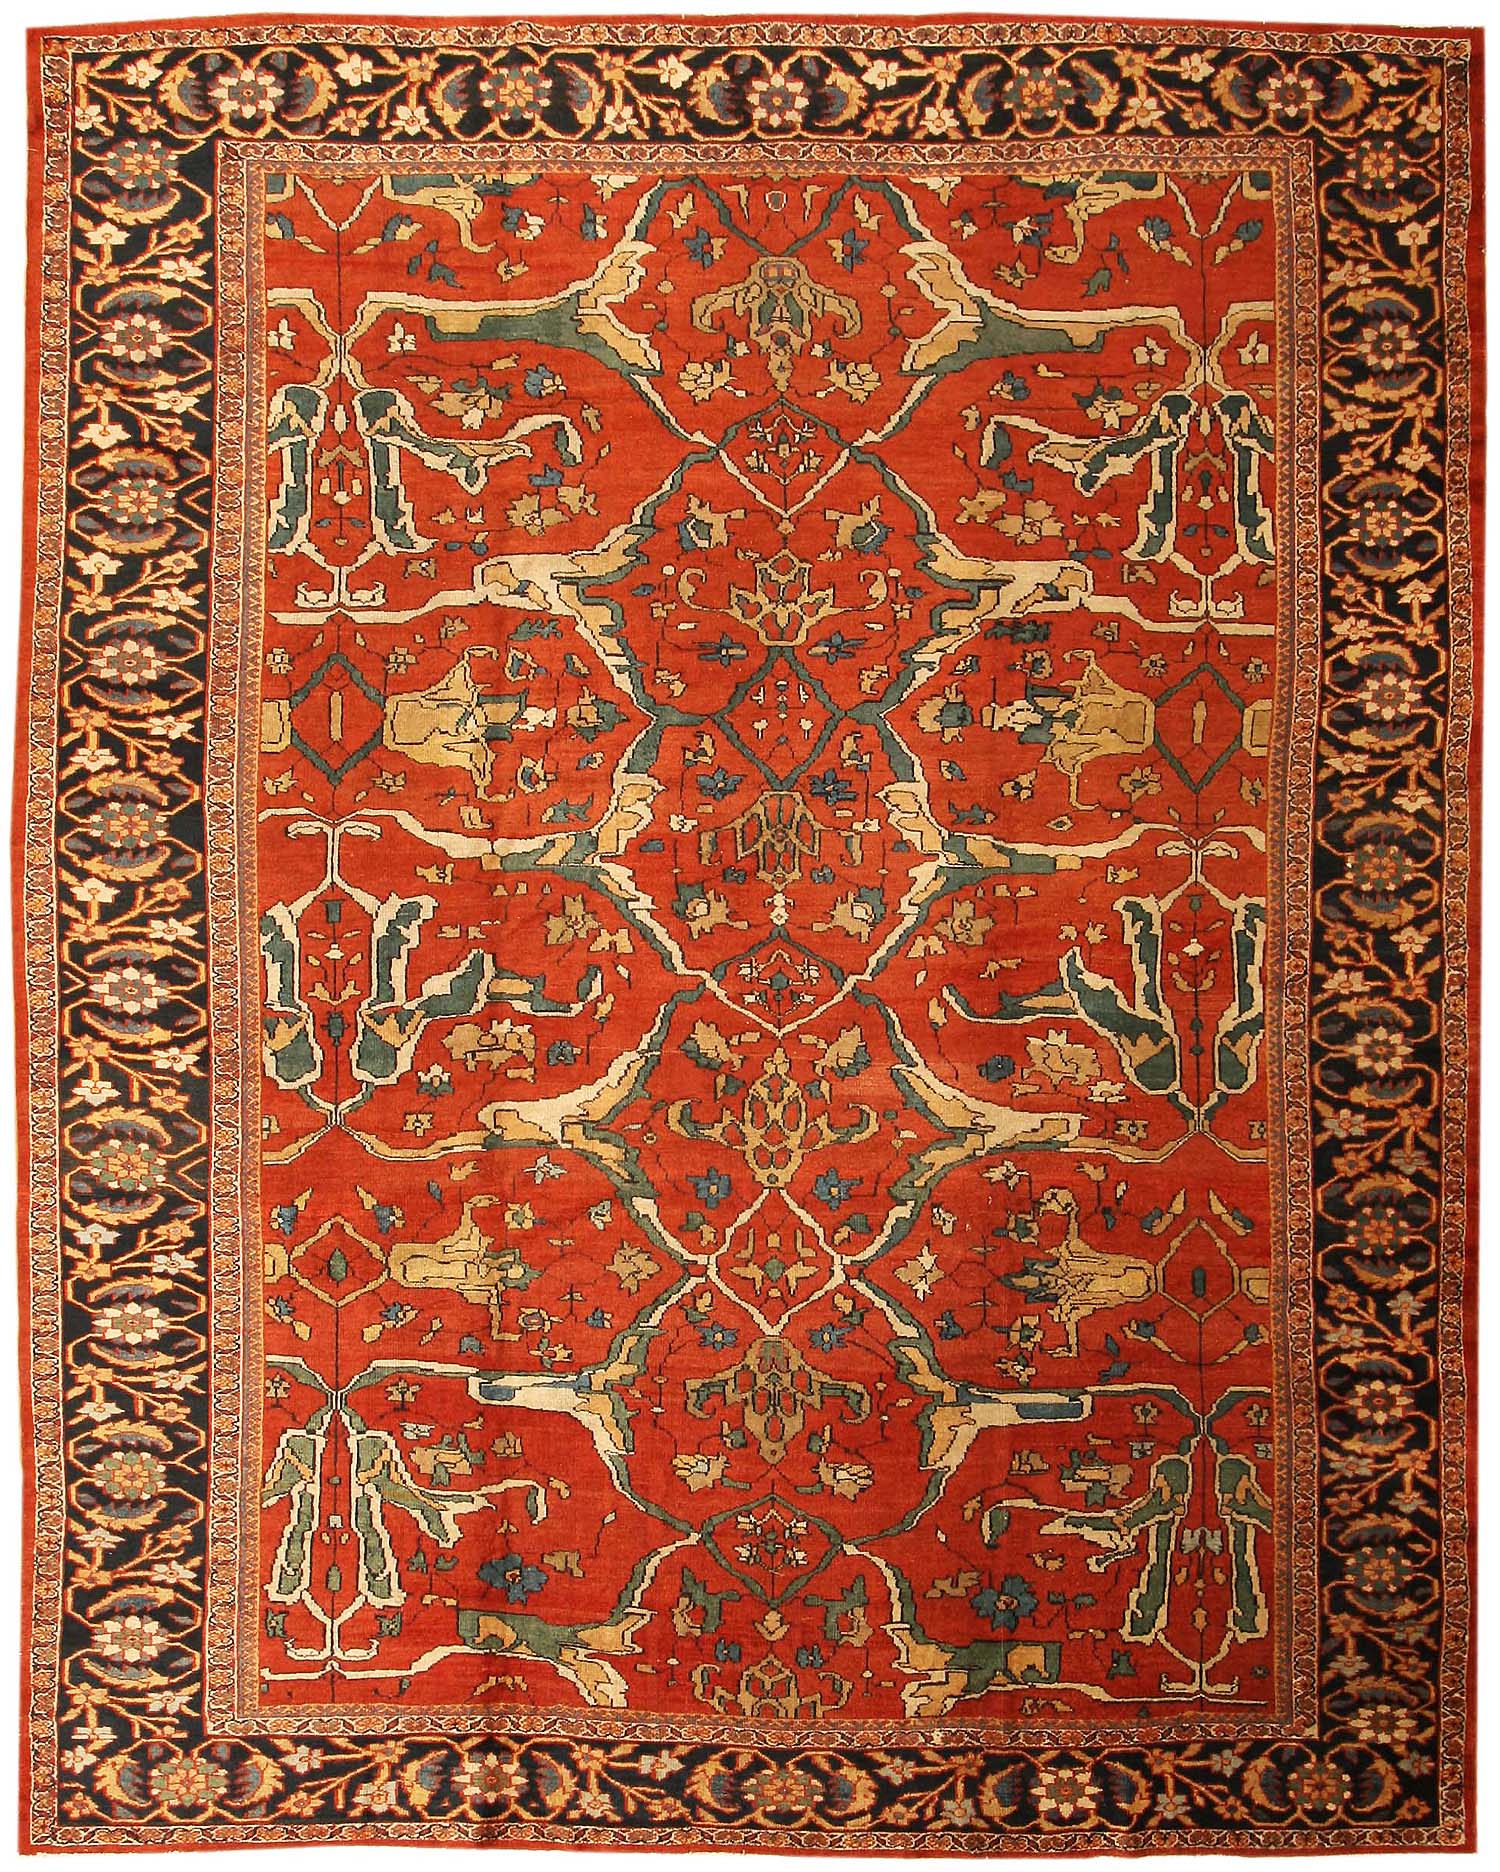 antique rugs sultanabad | antique persian sultanabad rug 43442 nazmiyal rugs LTIFWGD